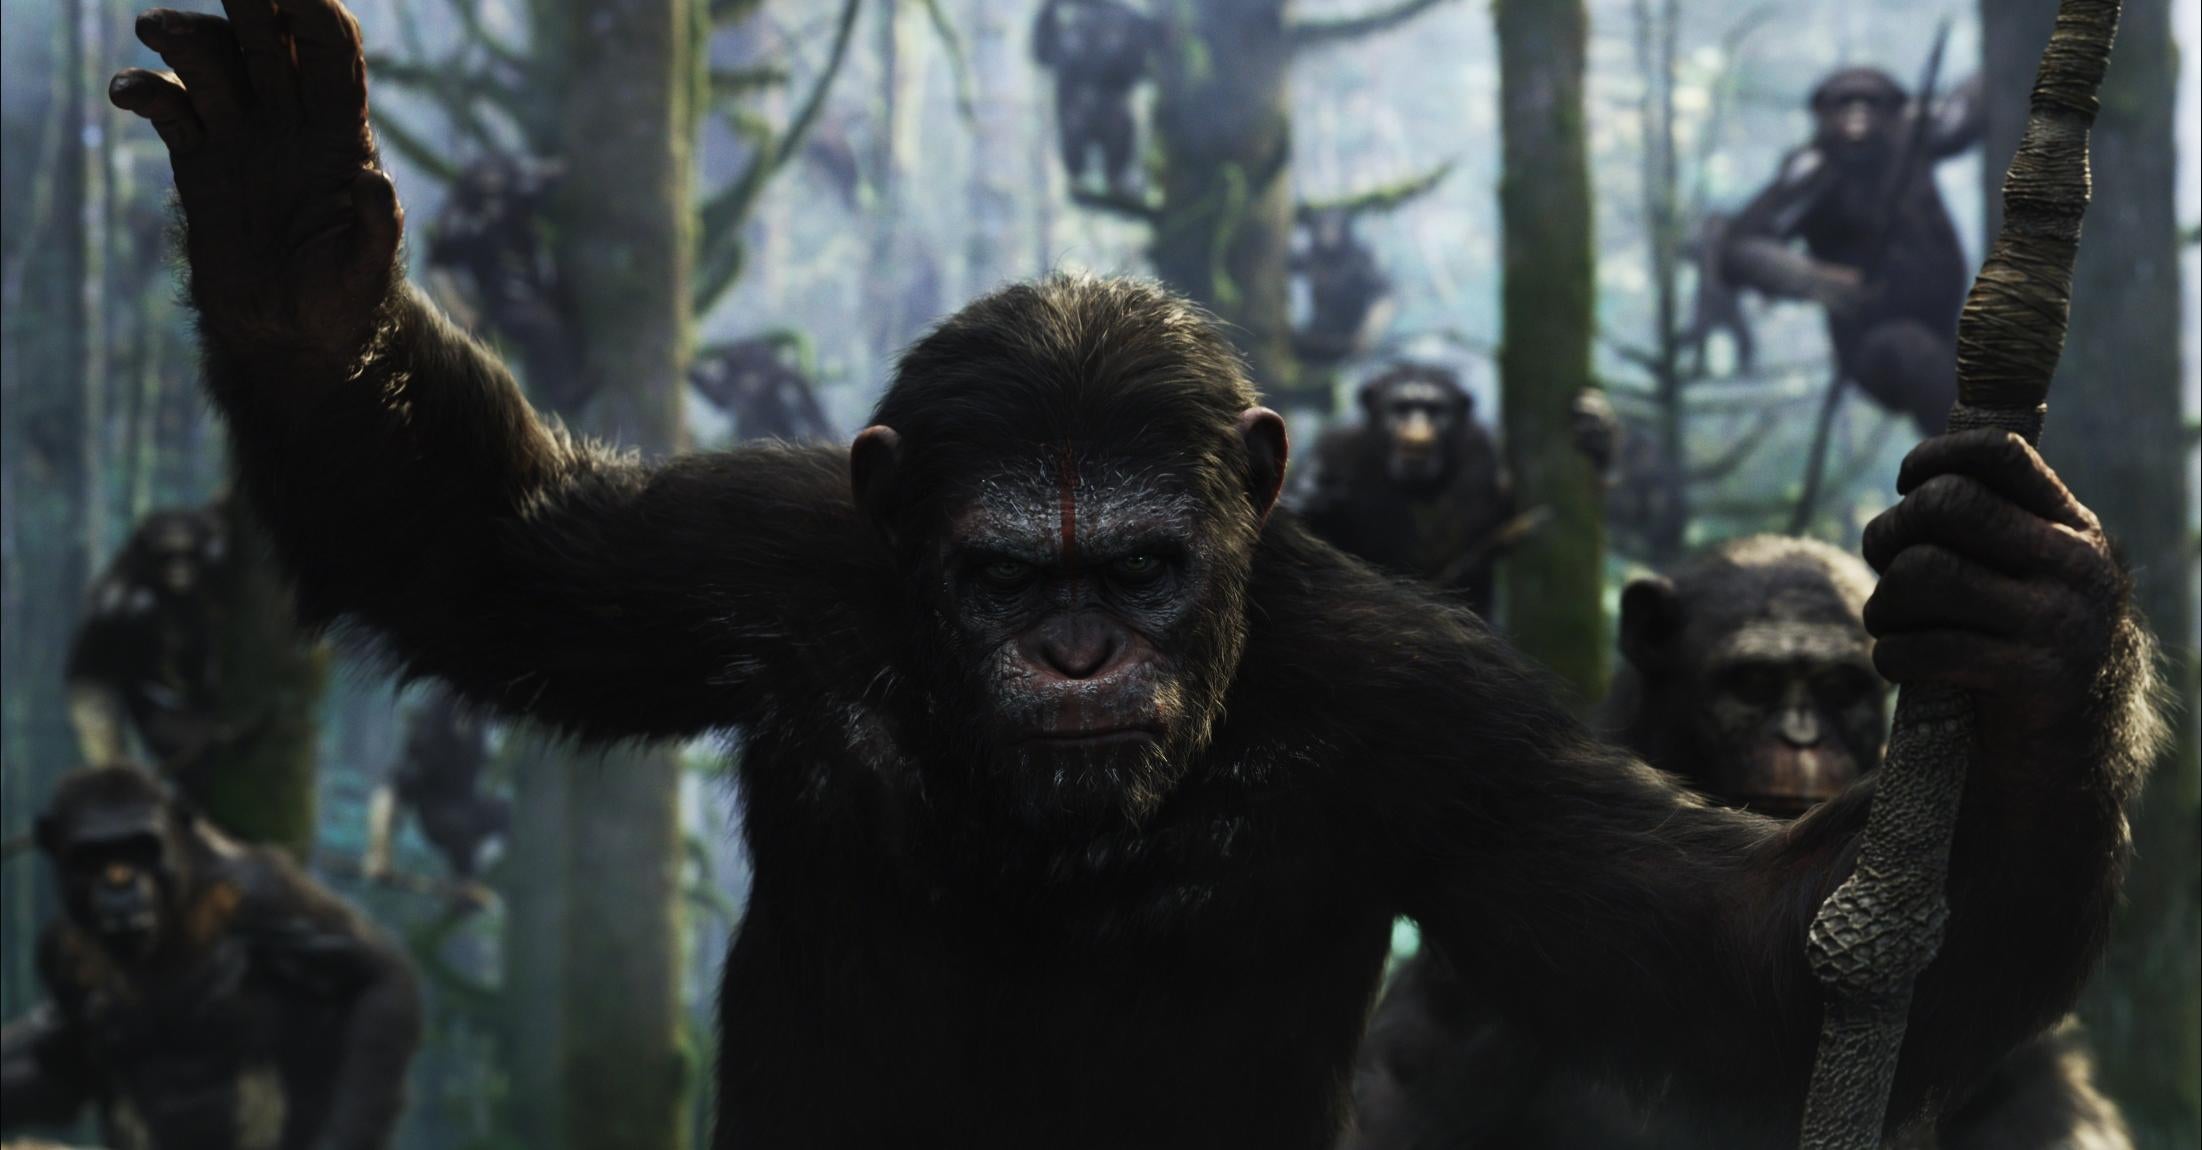 dawn-of-the-planet-of-the-apes-caesar1.jpg